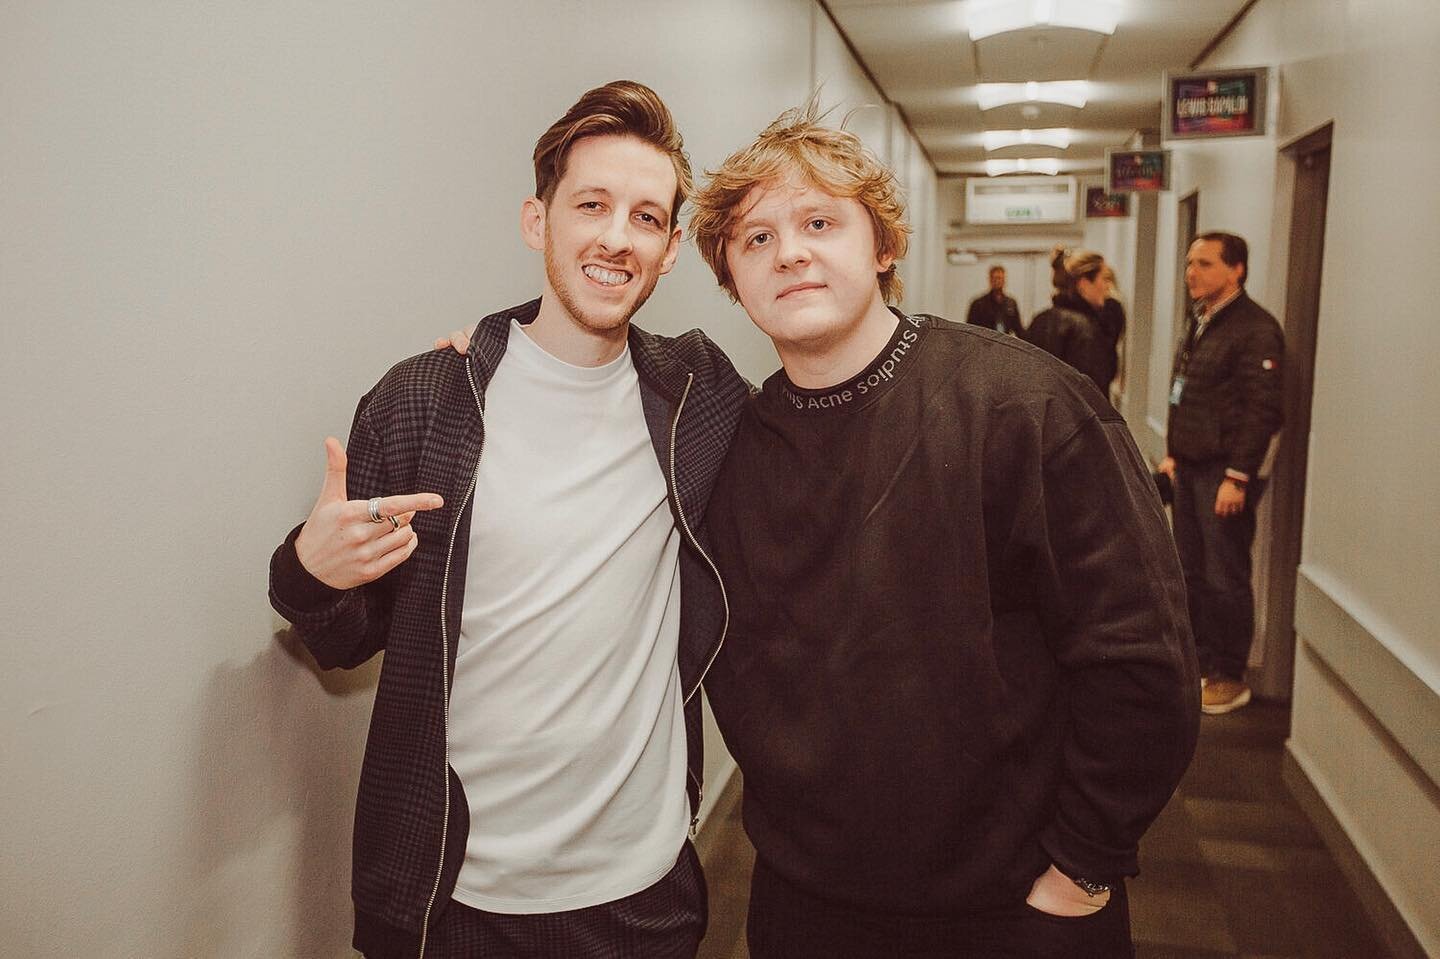 Who&rsquo;s seen the latest Capaldi documentary on Netflix? Well worth a watch. Raw, emotional &amp; inspirational. Little throwback here to a tour where we got to spend some time quality with Lewis and Sigala&hellip; can verify, not only does he hav